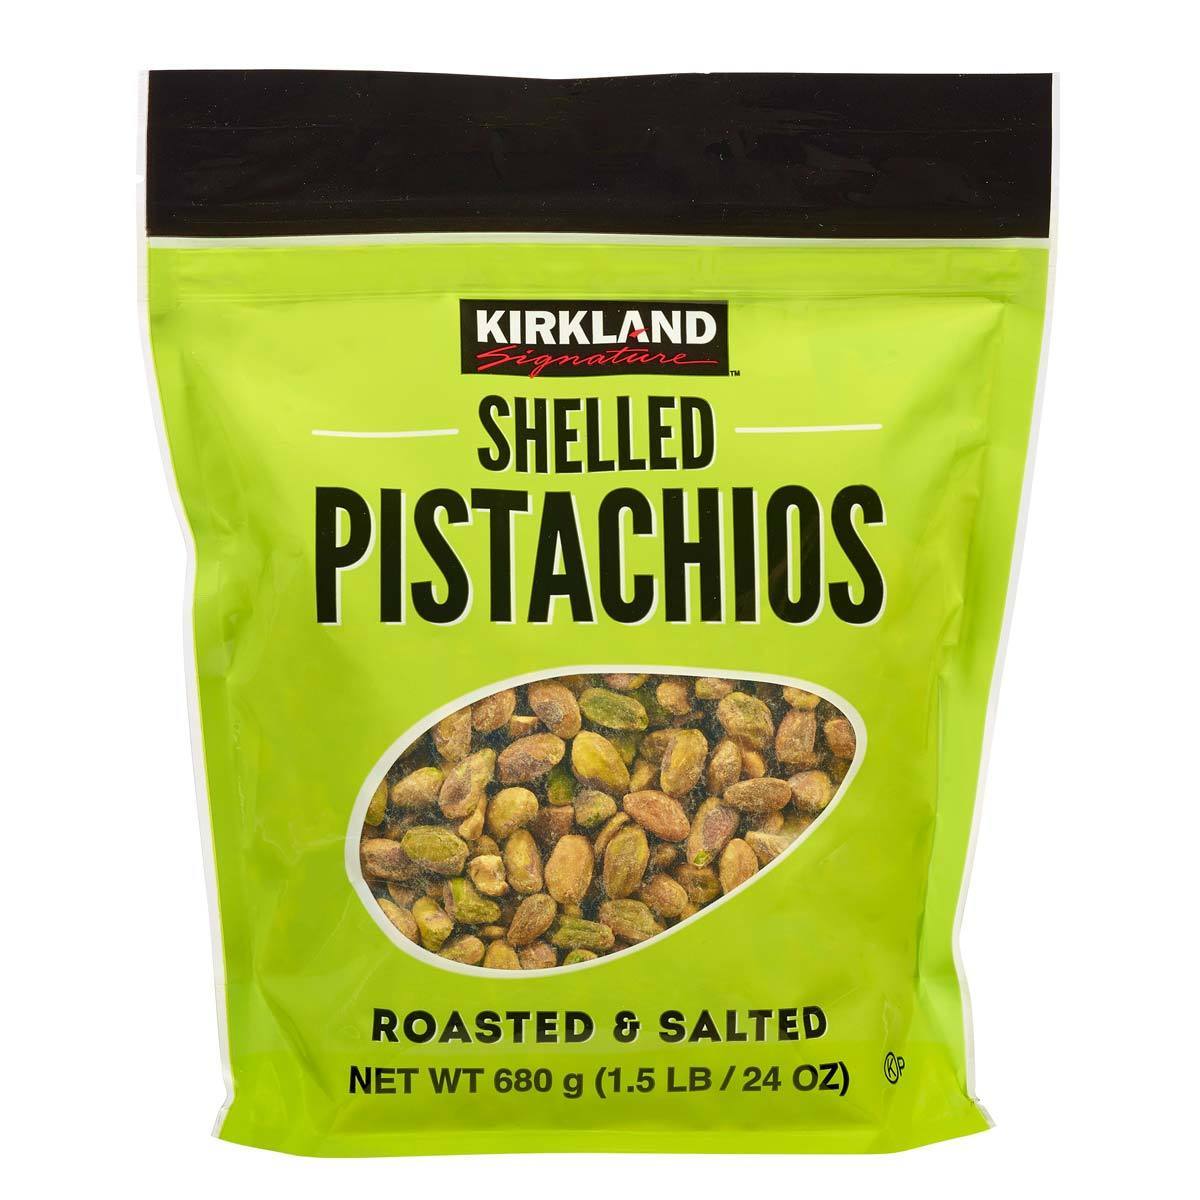 Kirkland Signature Roasted and Salted Shelled Pistachios, 680g